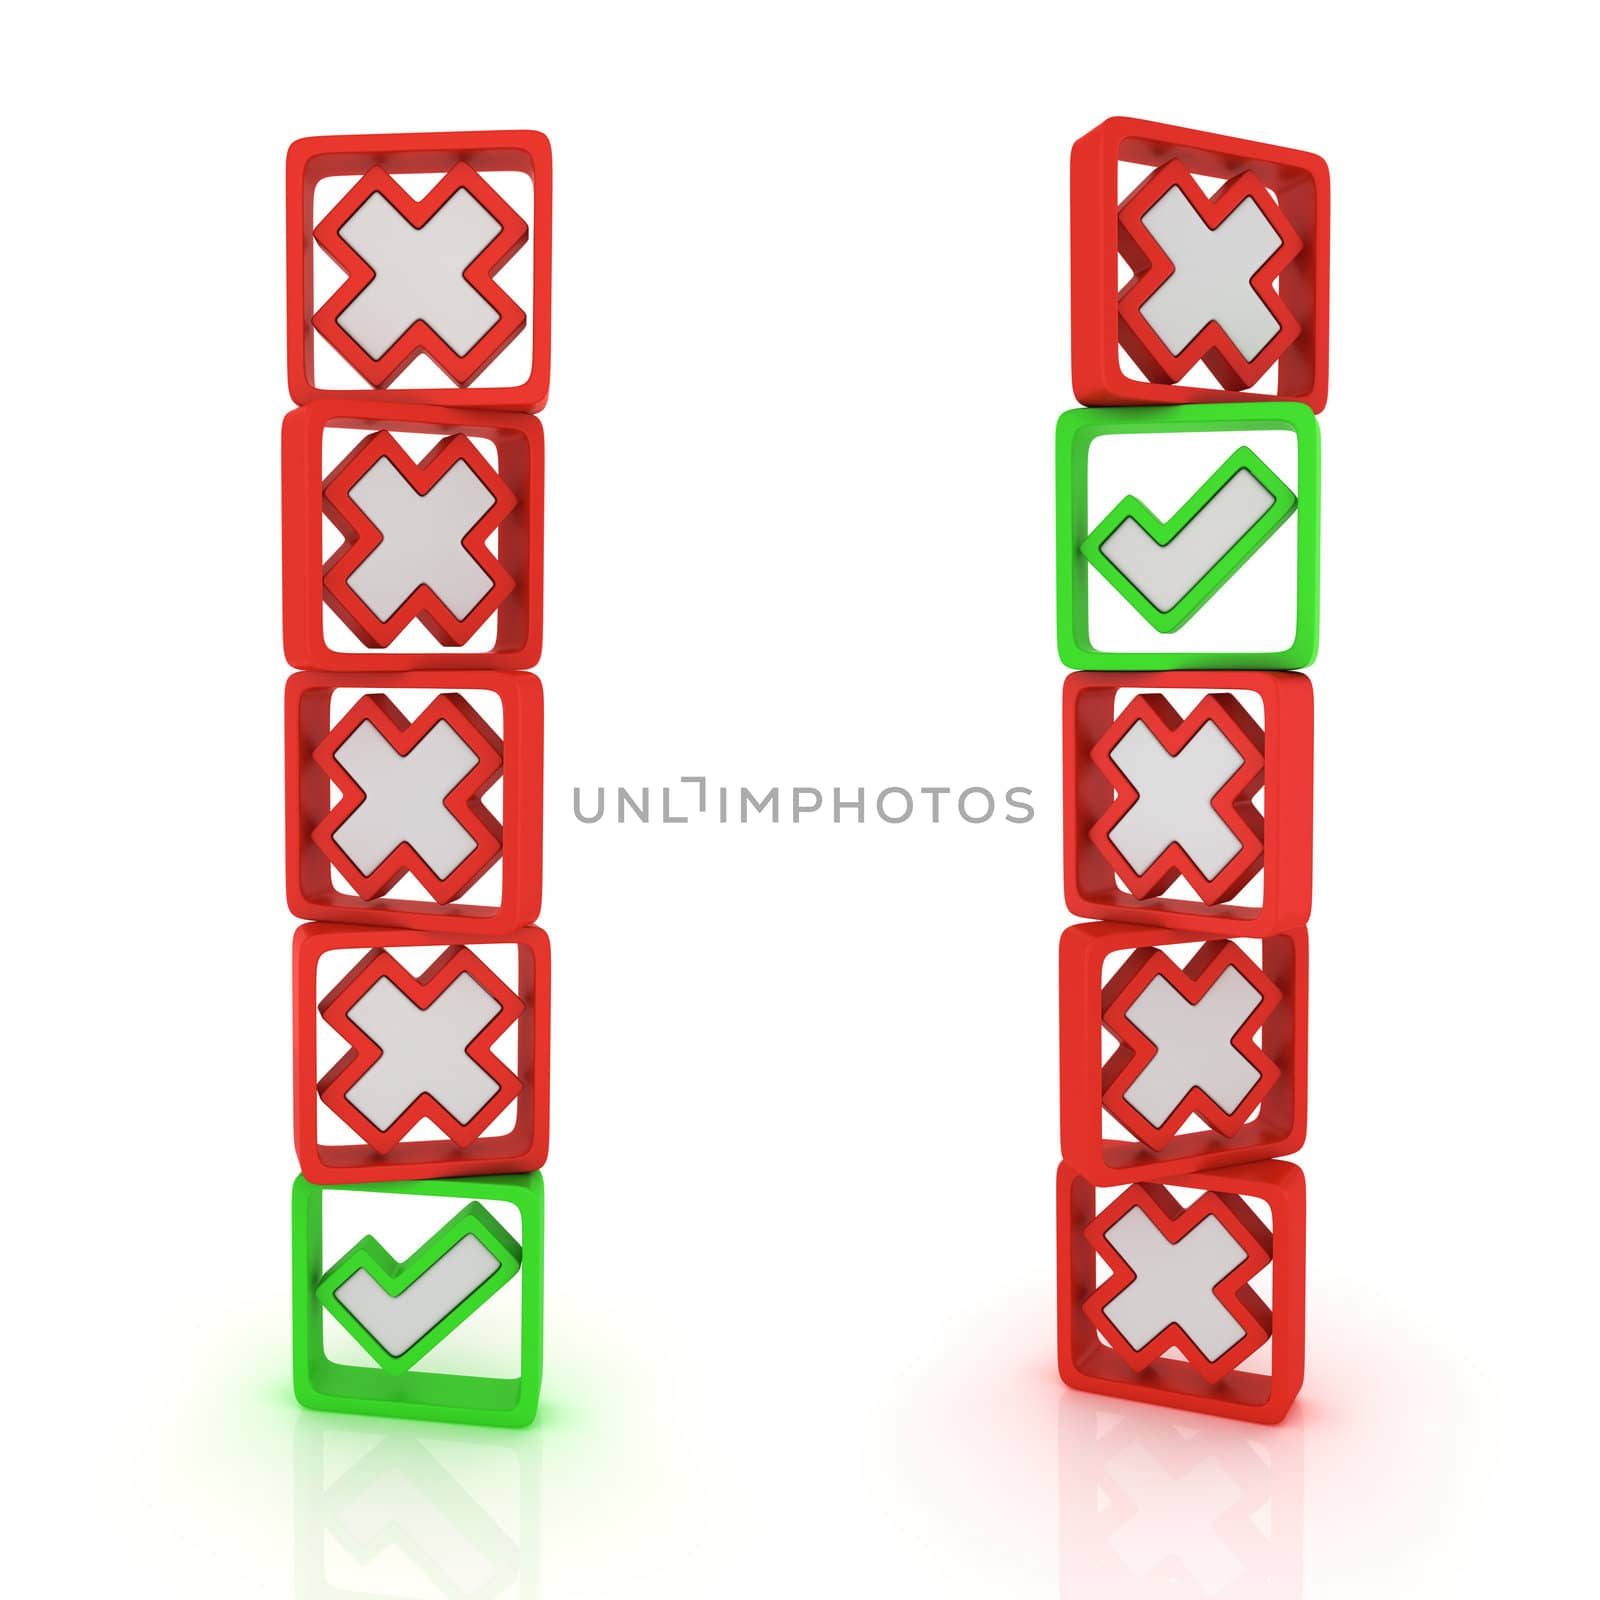 Columns of green ticks and red crosses